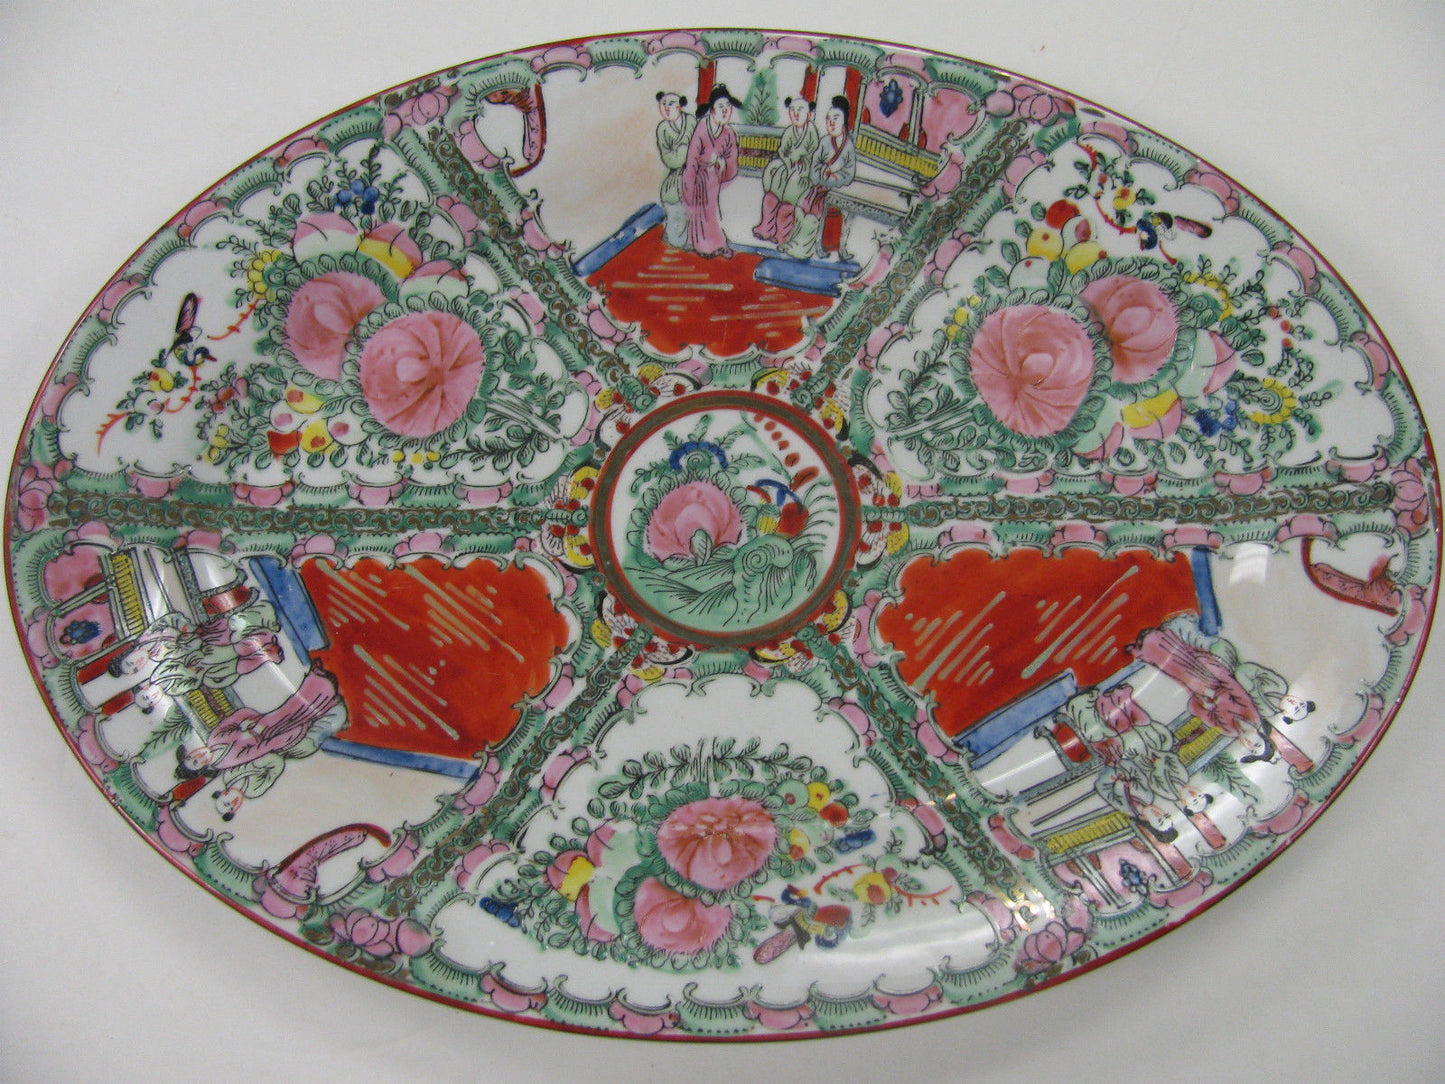 16" ROSE MEDALLION CHARGER-CHINESE CANTON EXPORT PORCELAIN